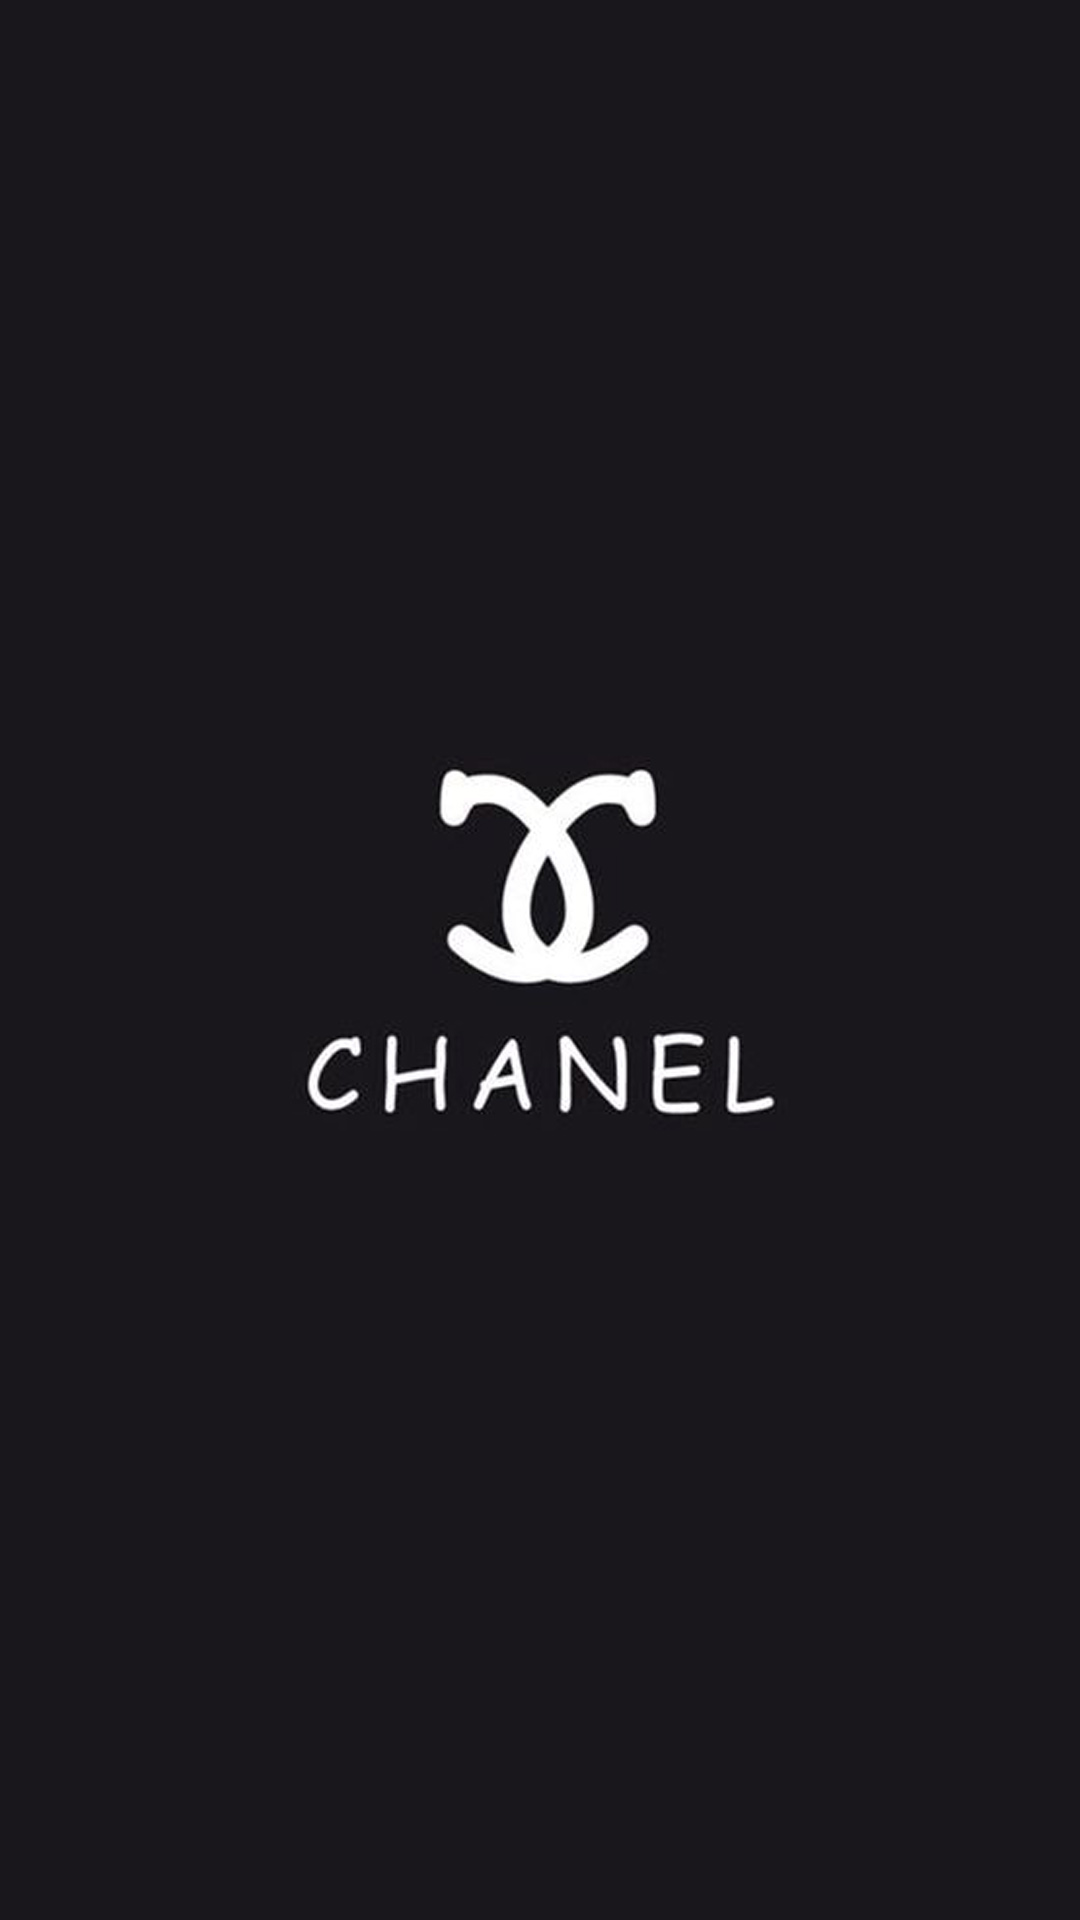 Free Download Chanel Iphone Backgrounds 1080x19 For Your Desktop Mobile Tablet Explore 75 Chanel Wallpaper Coco Chanel Logo Wallpaper Chanel Wallpaper For Desktop Pink Chanel Wallpaper